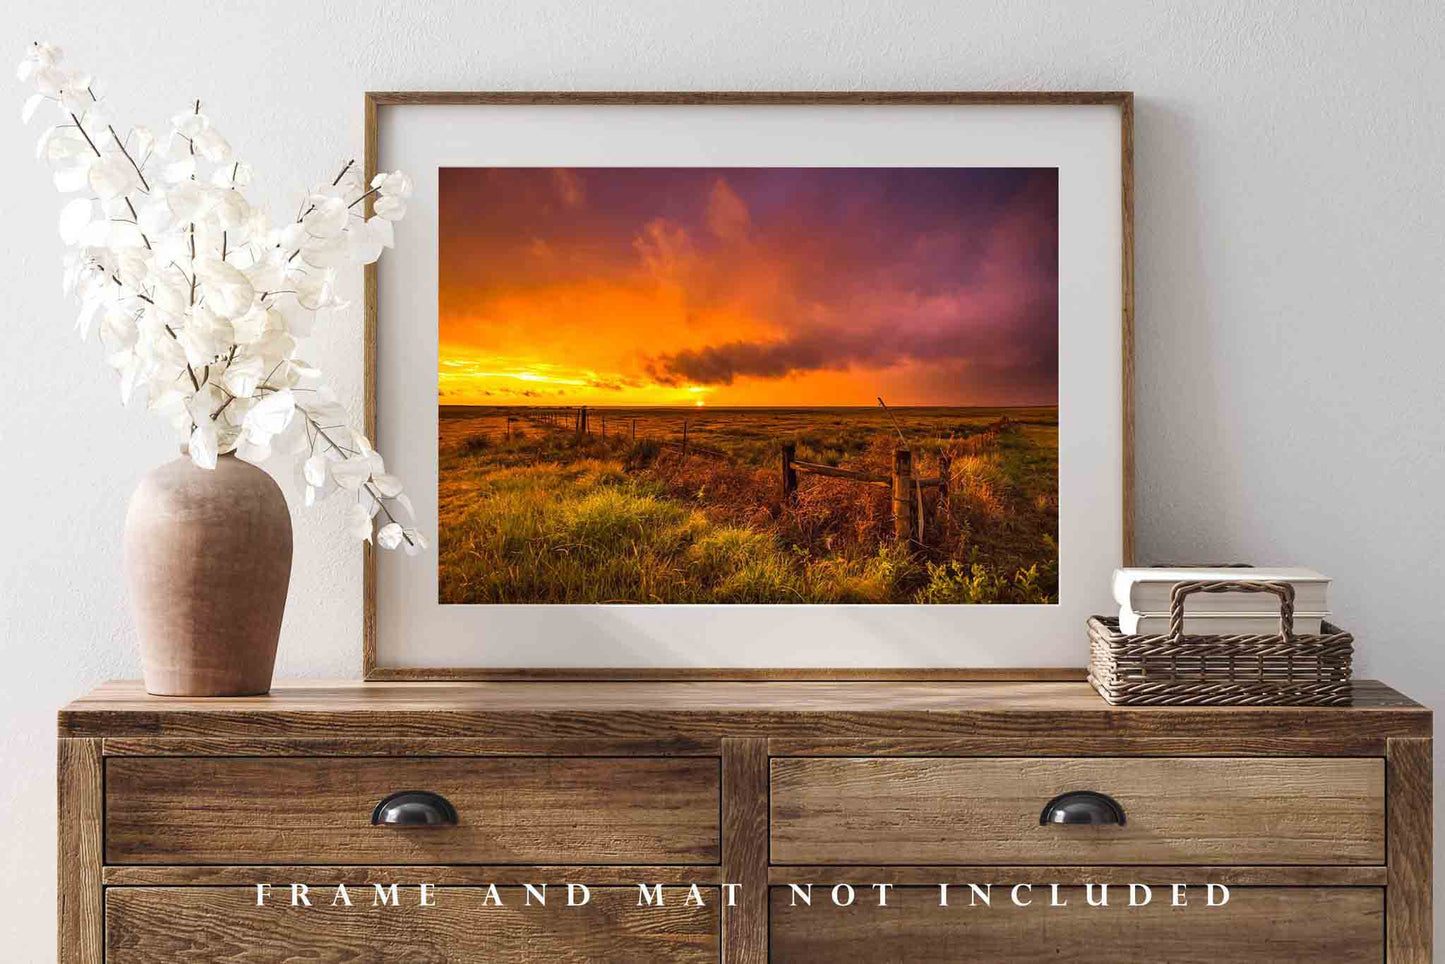 Plains Photography Print - Wall Art Picture of Scenic Sunset Over Fence Row on Stormy Day in Oklahoma Panhandle Rustic Western Sky Decor